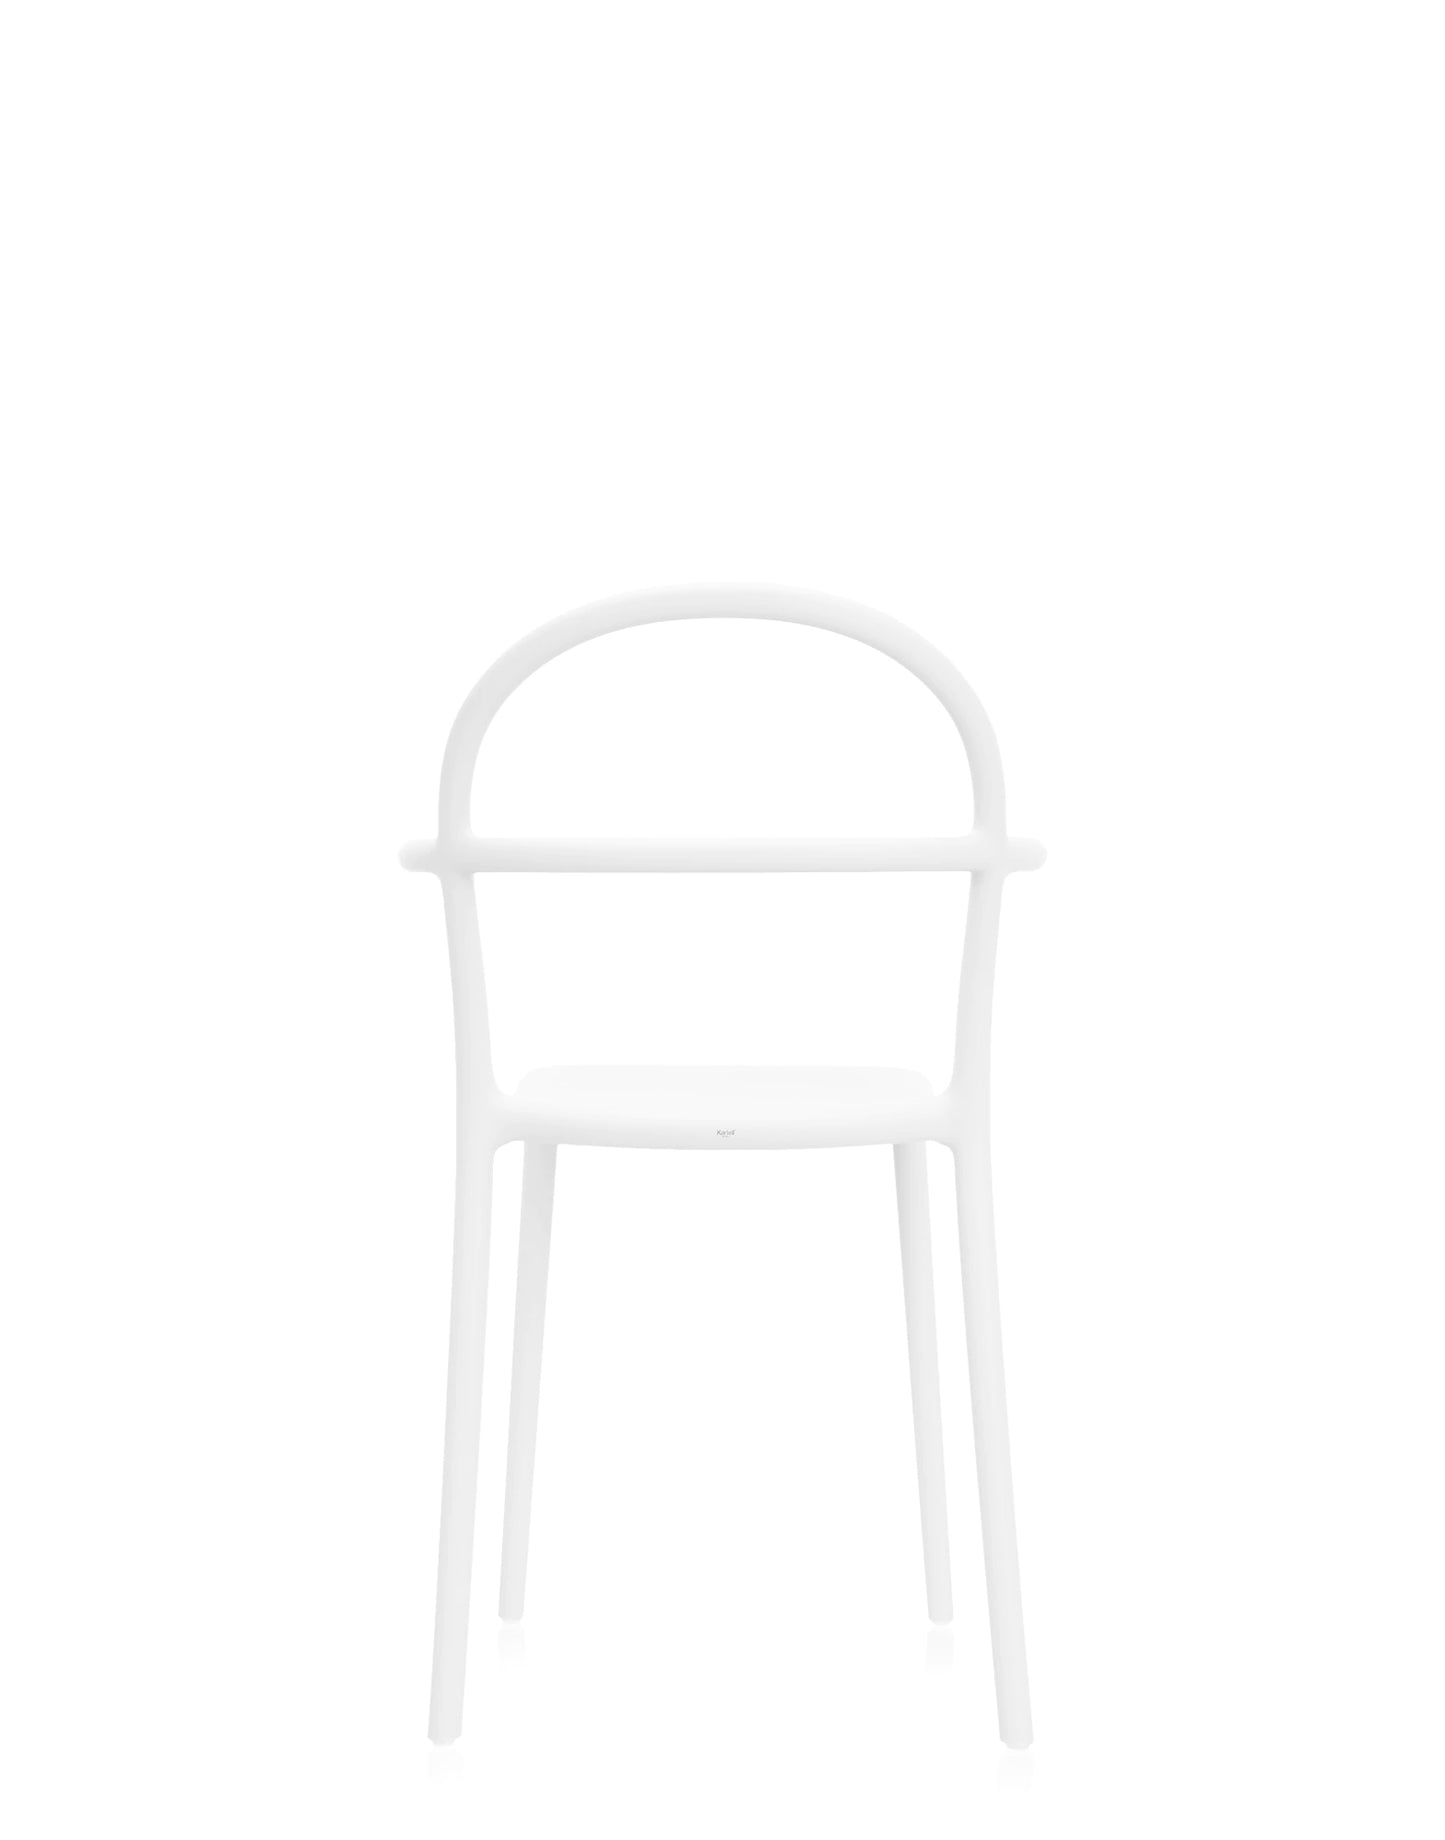 C Chair in White, Set of 2